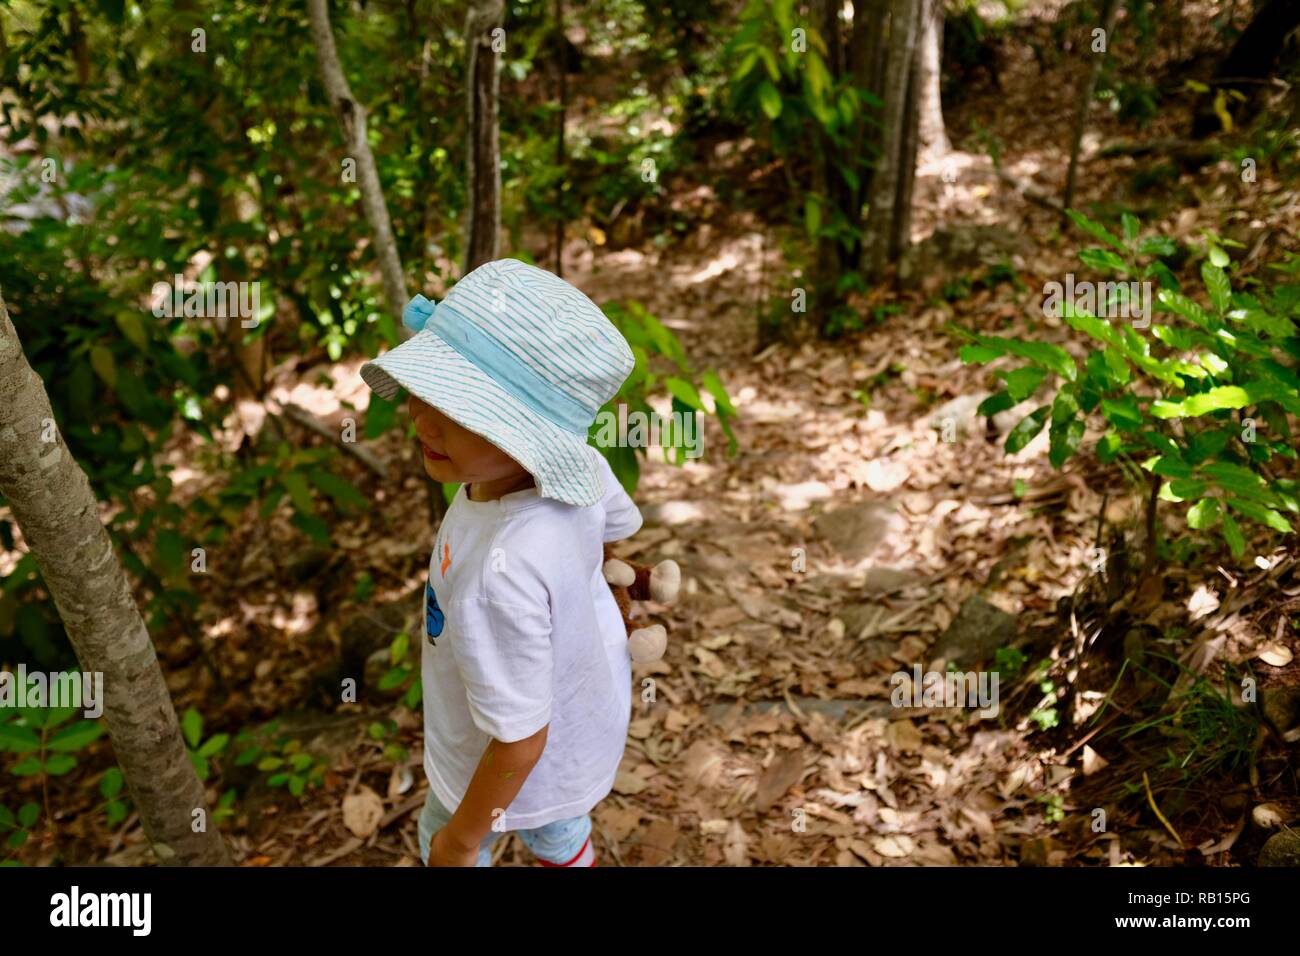 A young girl walking through a forest holding a teddy bear, Alligator Creek, Townsville, Qld, Australia Stock Photo